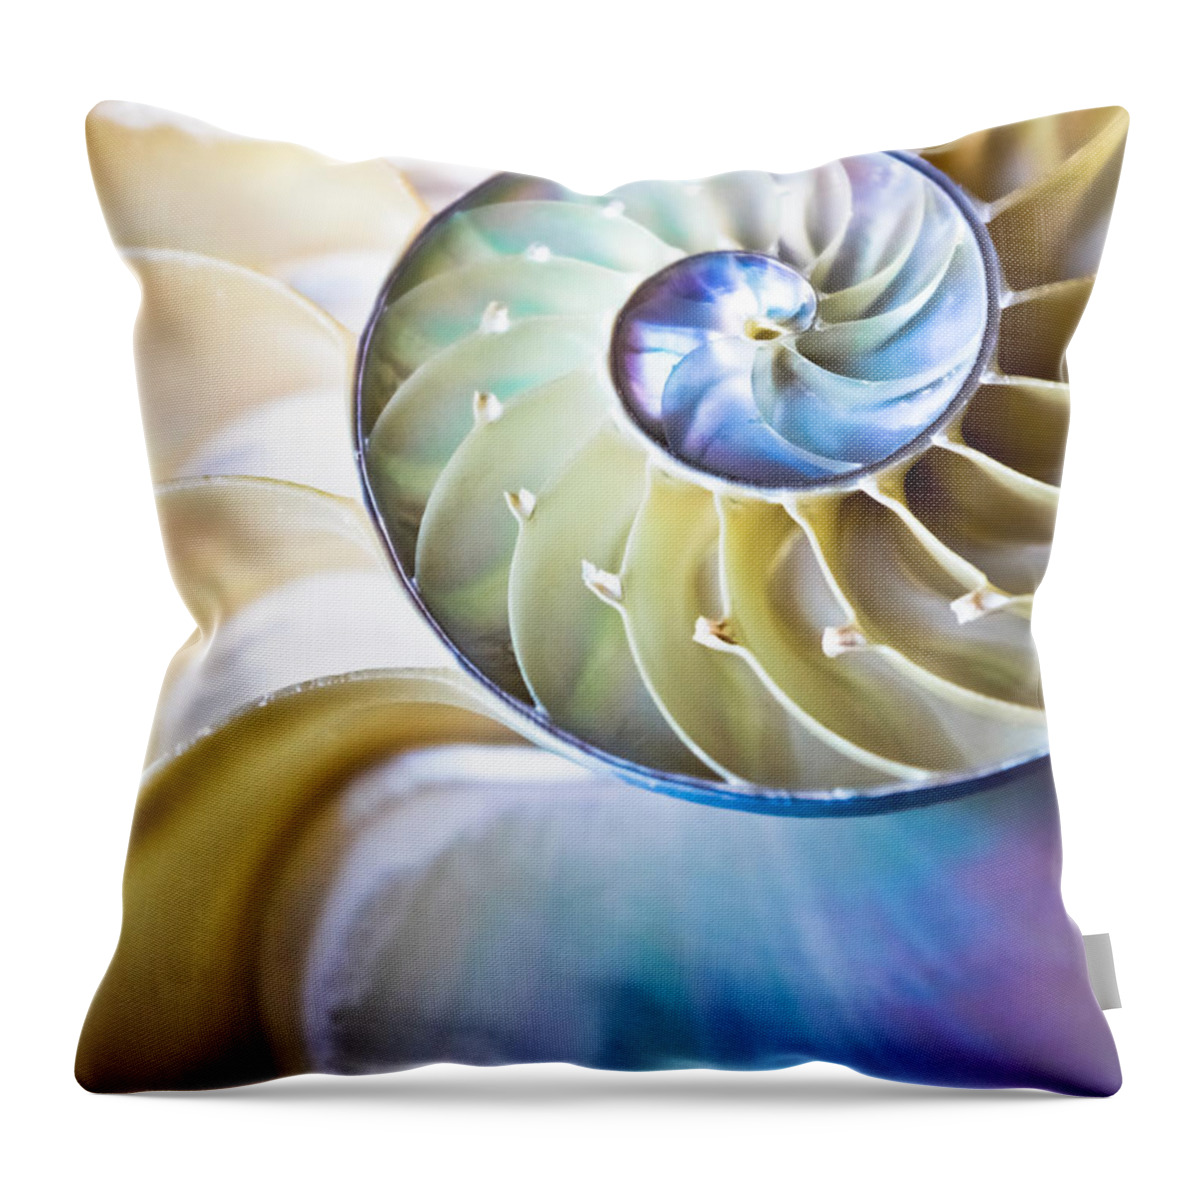 Nautilus Throw Pillow featuring the photograph The Beauty of Nautilus by Colleen Kammerer